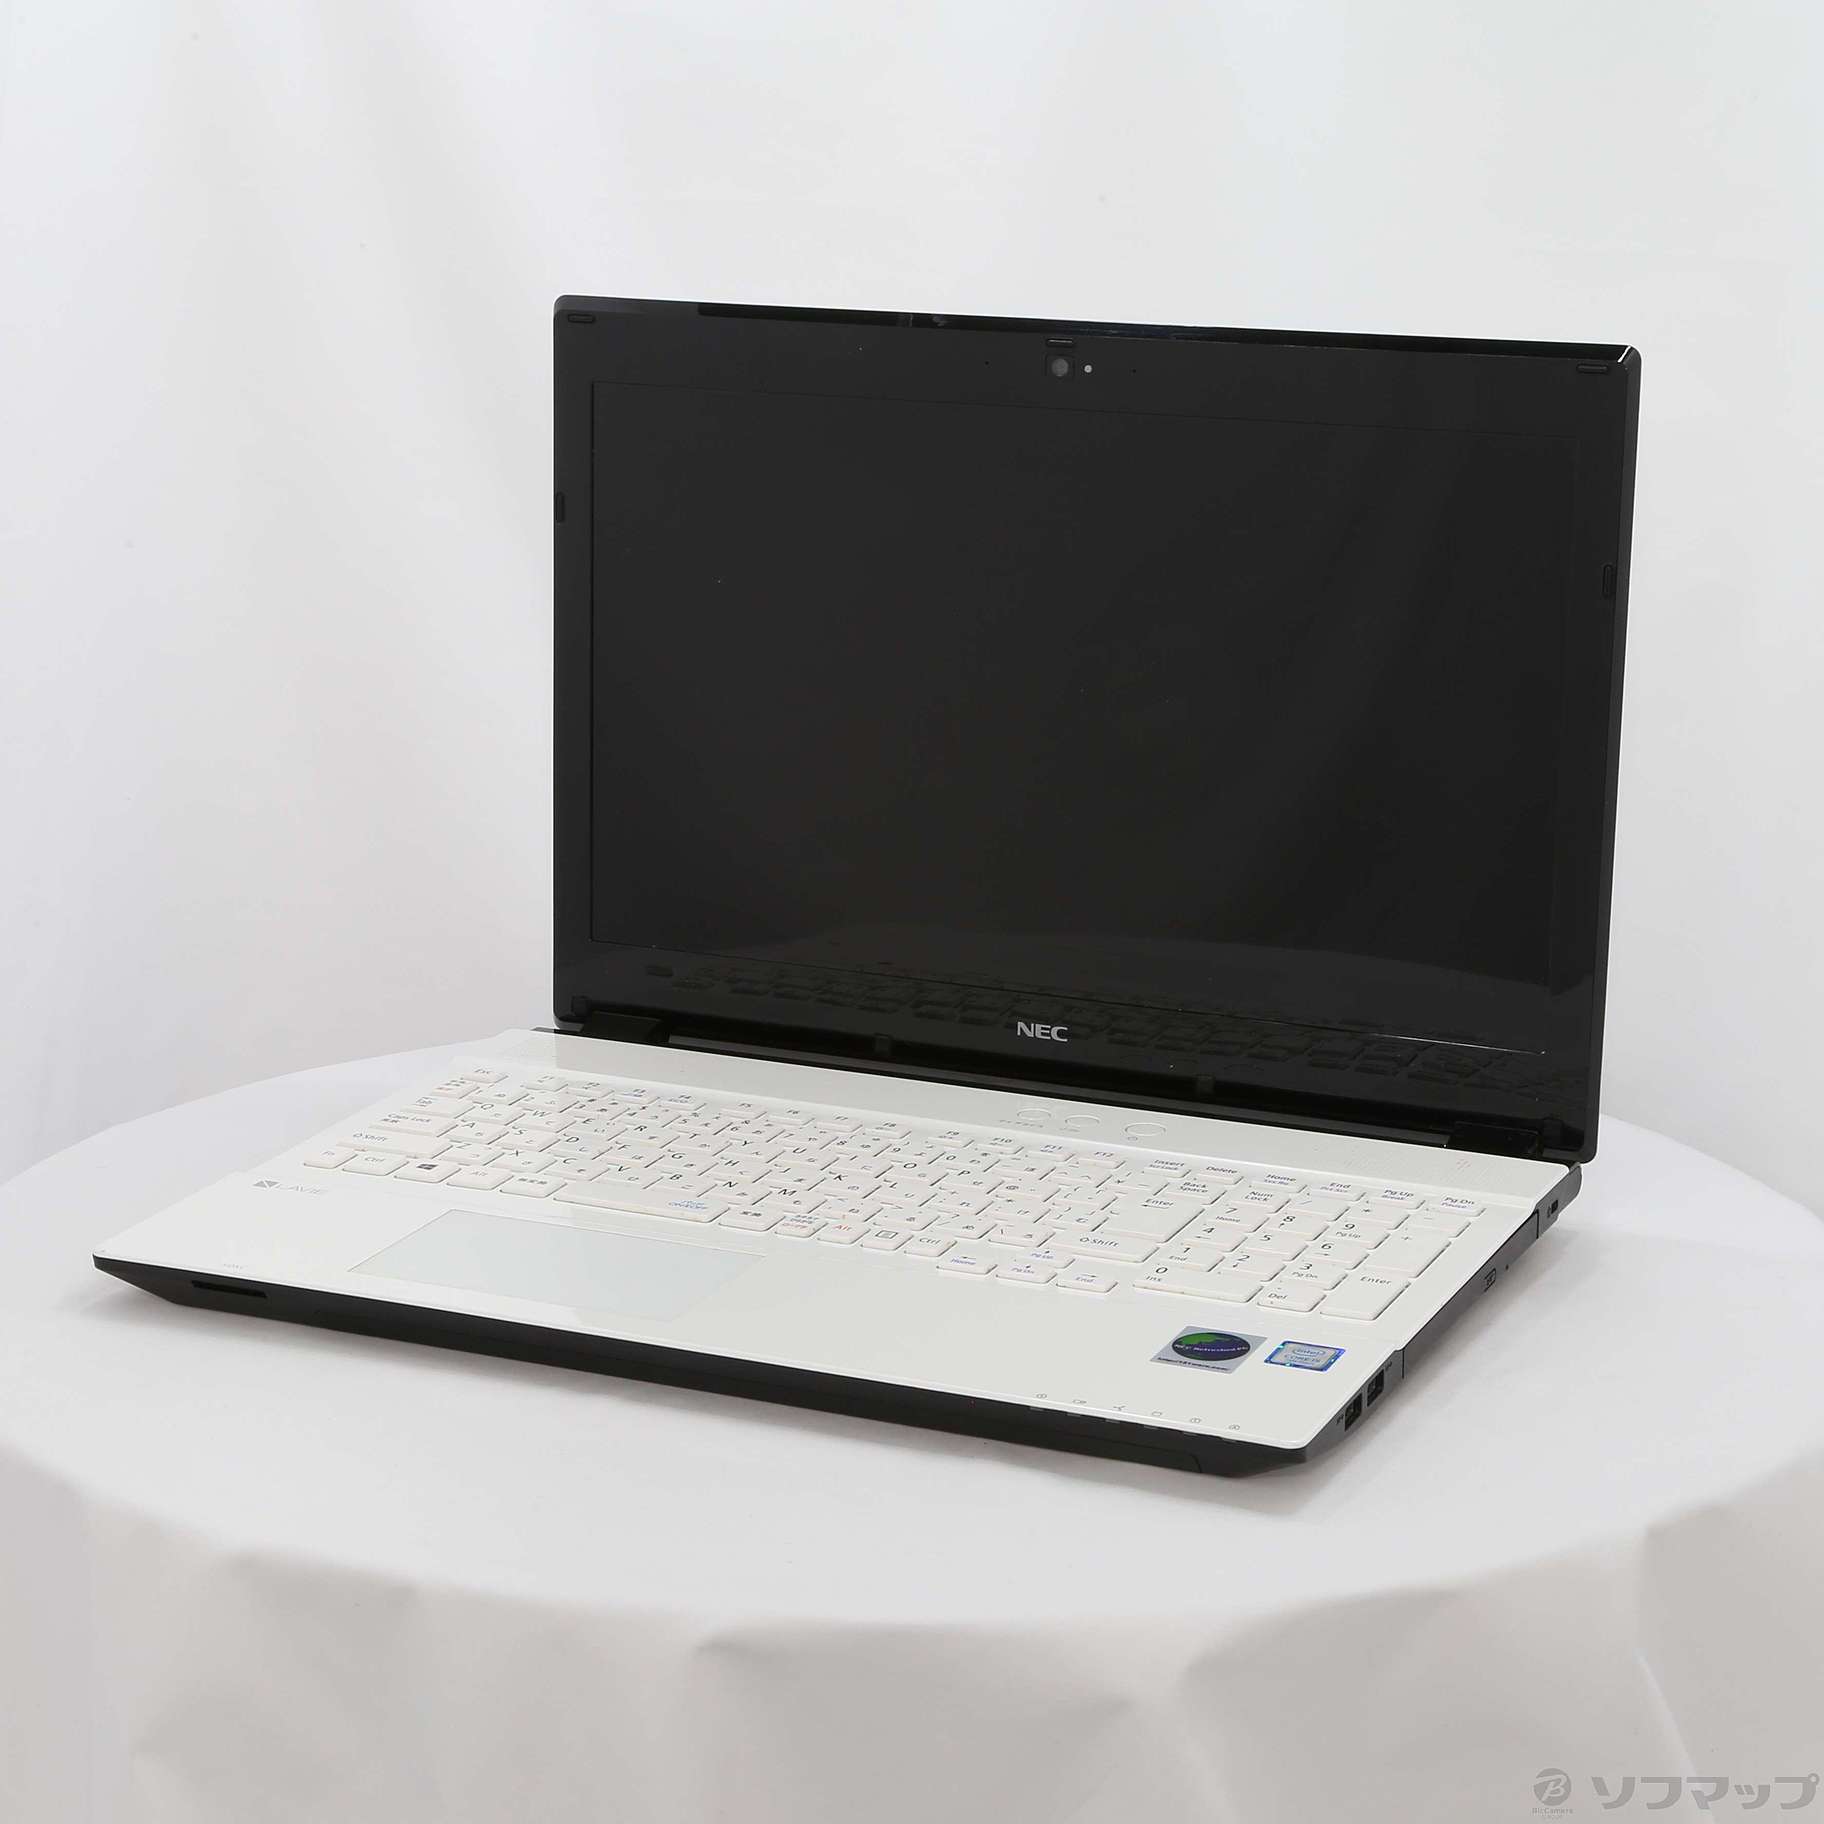 LaVie Note Standard PC-NS550FAW クリスタルホワイト 〔NEC Refreshed PC〕 〔Windows 10〕  ≪メーカー保証あり≫ ◇07/17(土)値下げ！